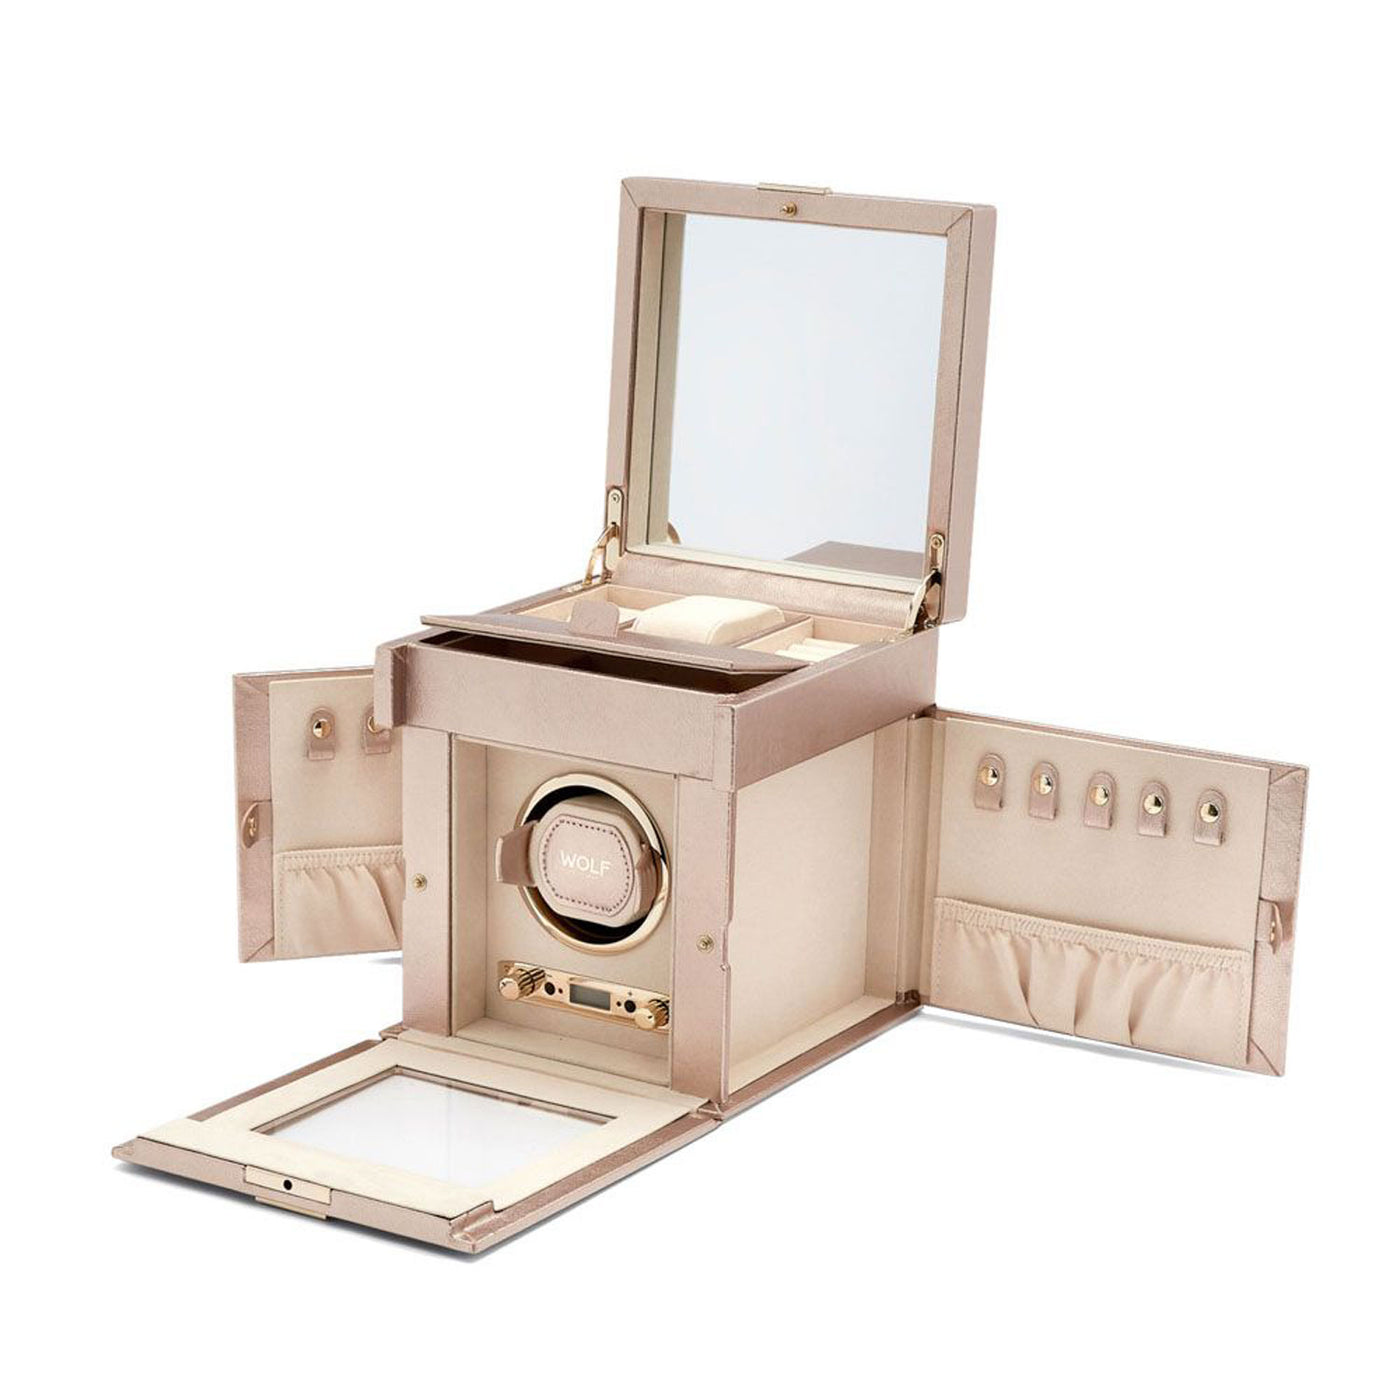 Wolf 1834 Palermo Single Watch Winder with Jewelry storage, mirror, and cover – 213716